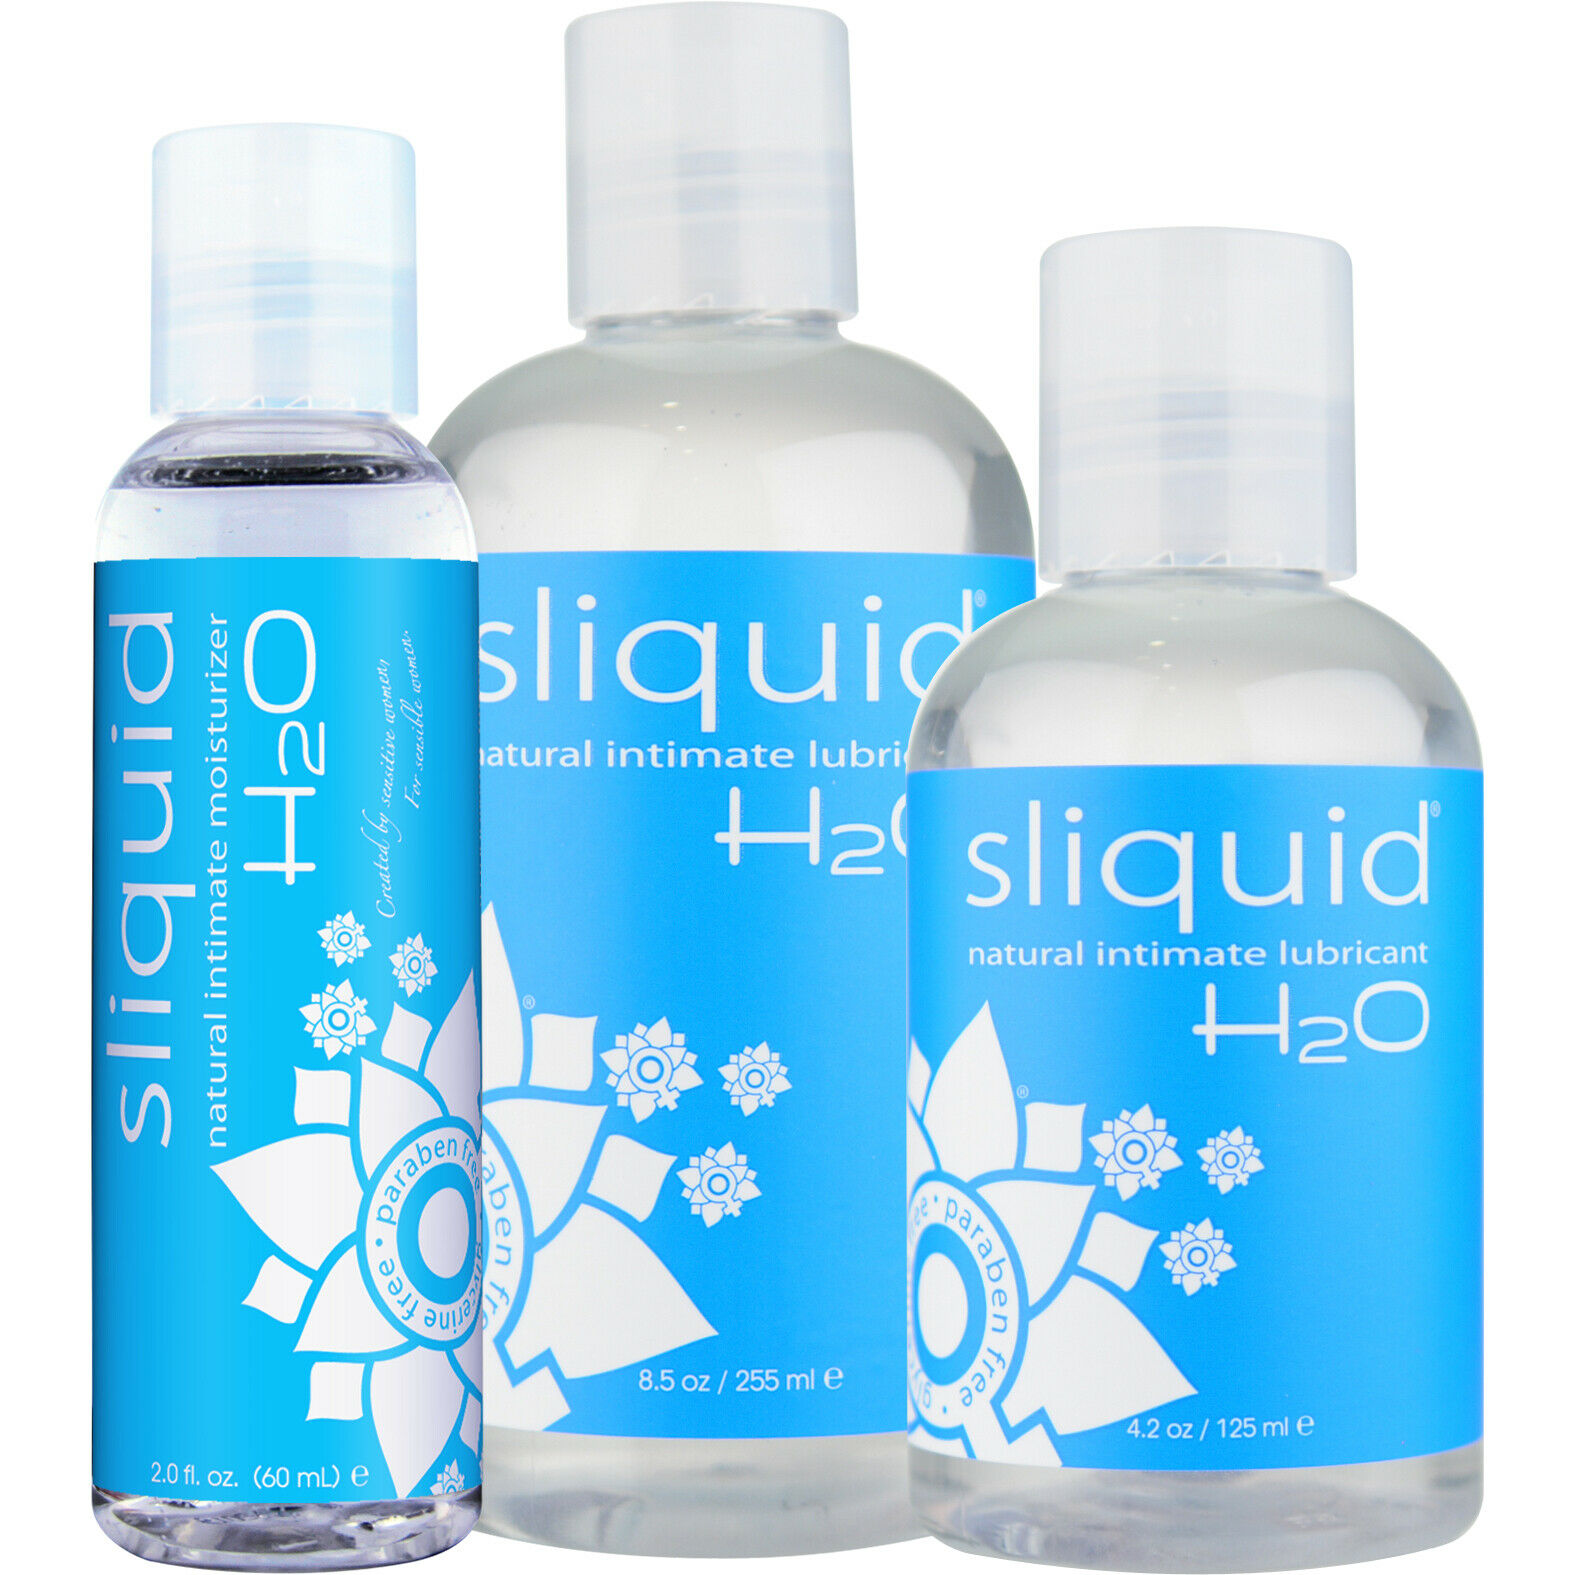 Sliquid Naturals H2o Water Based Natural Intimate Personal Lubricant - Pick Size